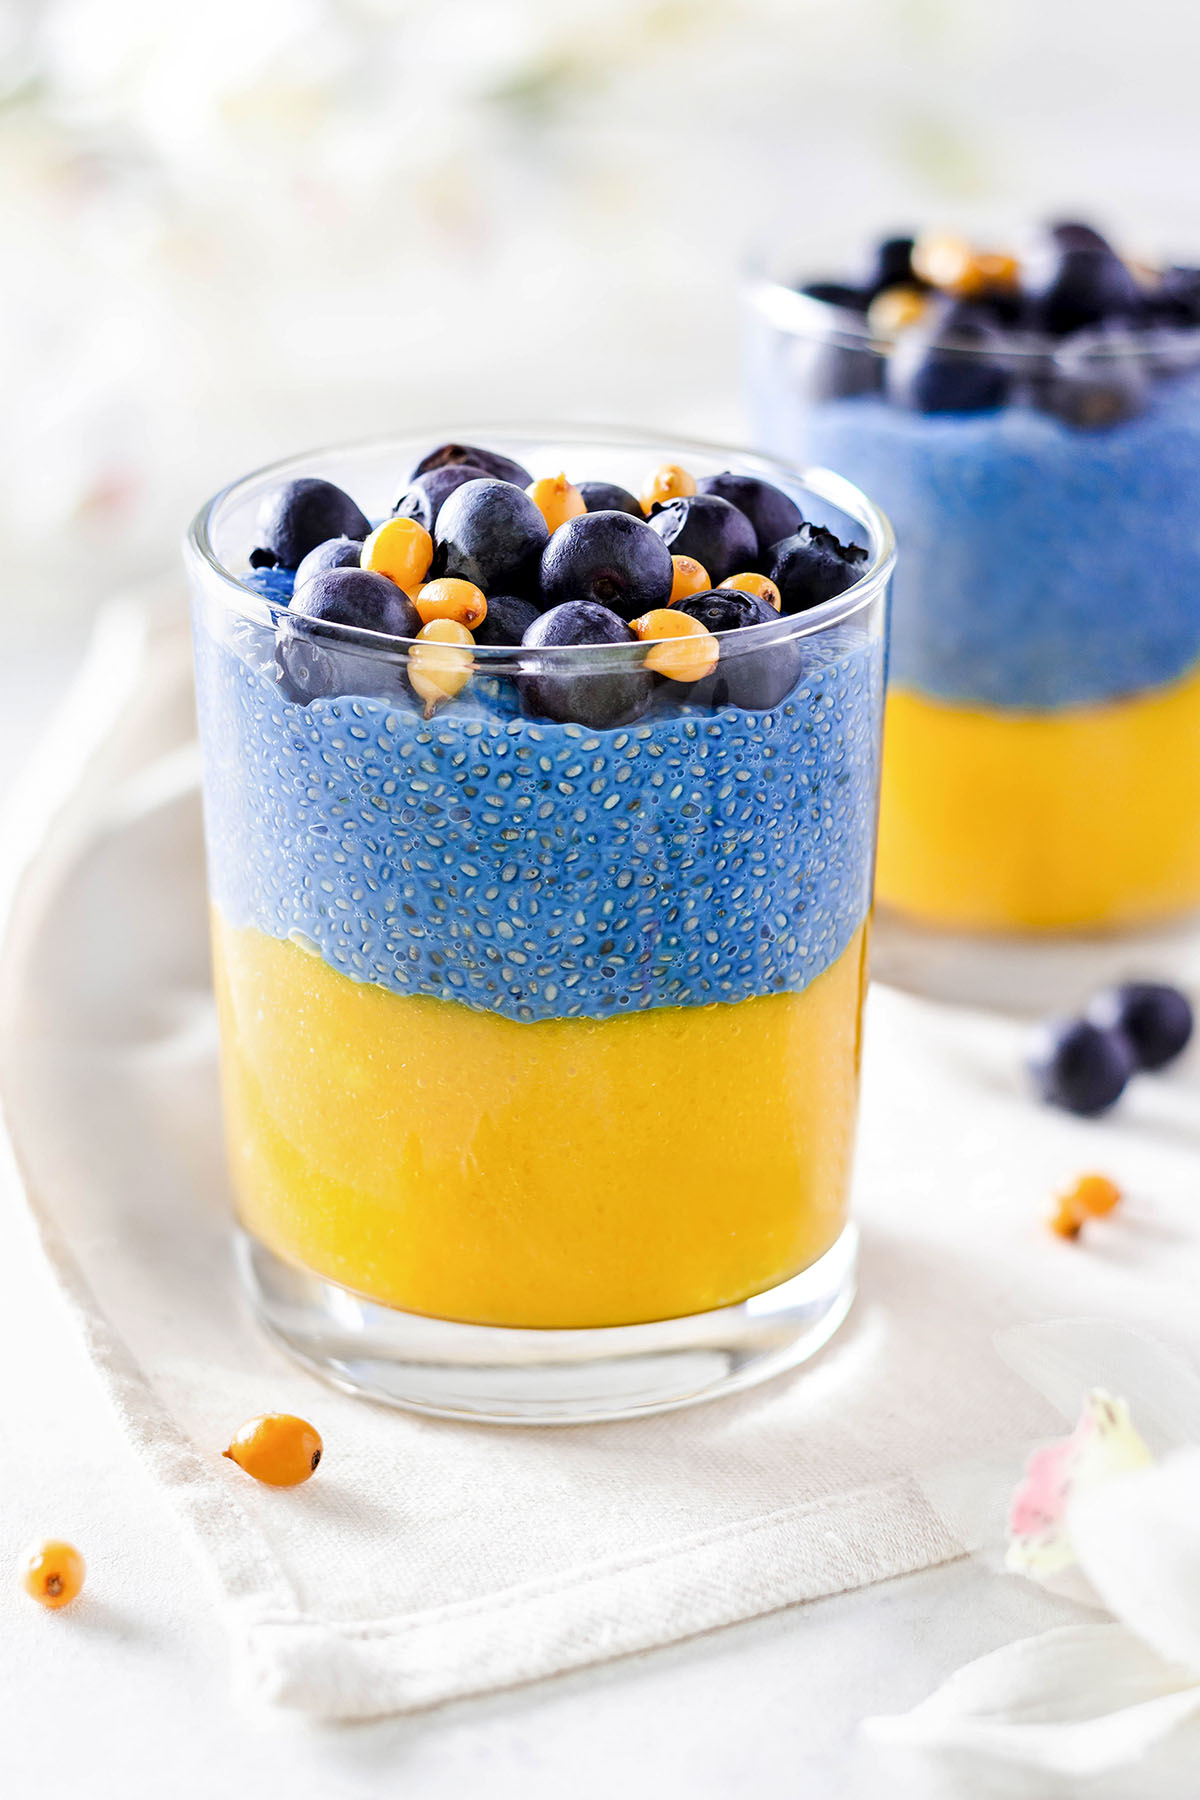 Mango chia pudding  of blue and yellow layers in a glass